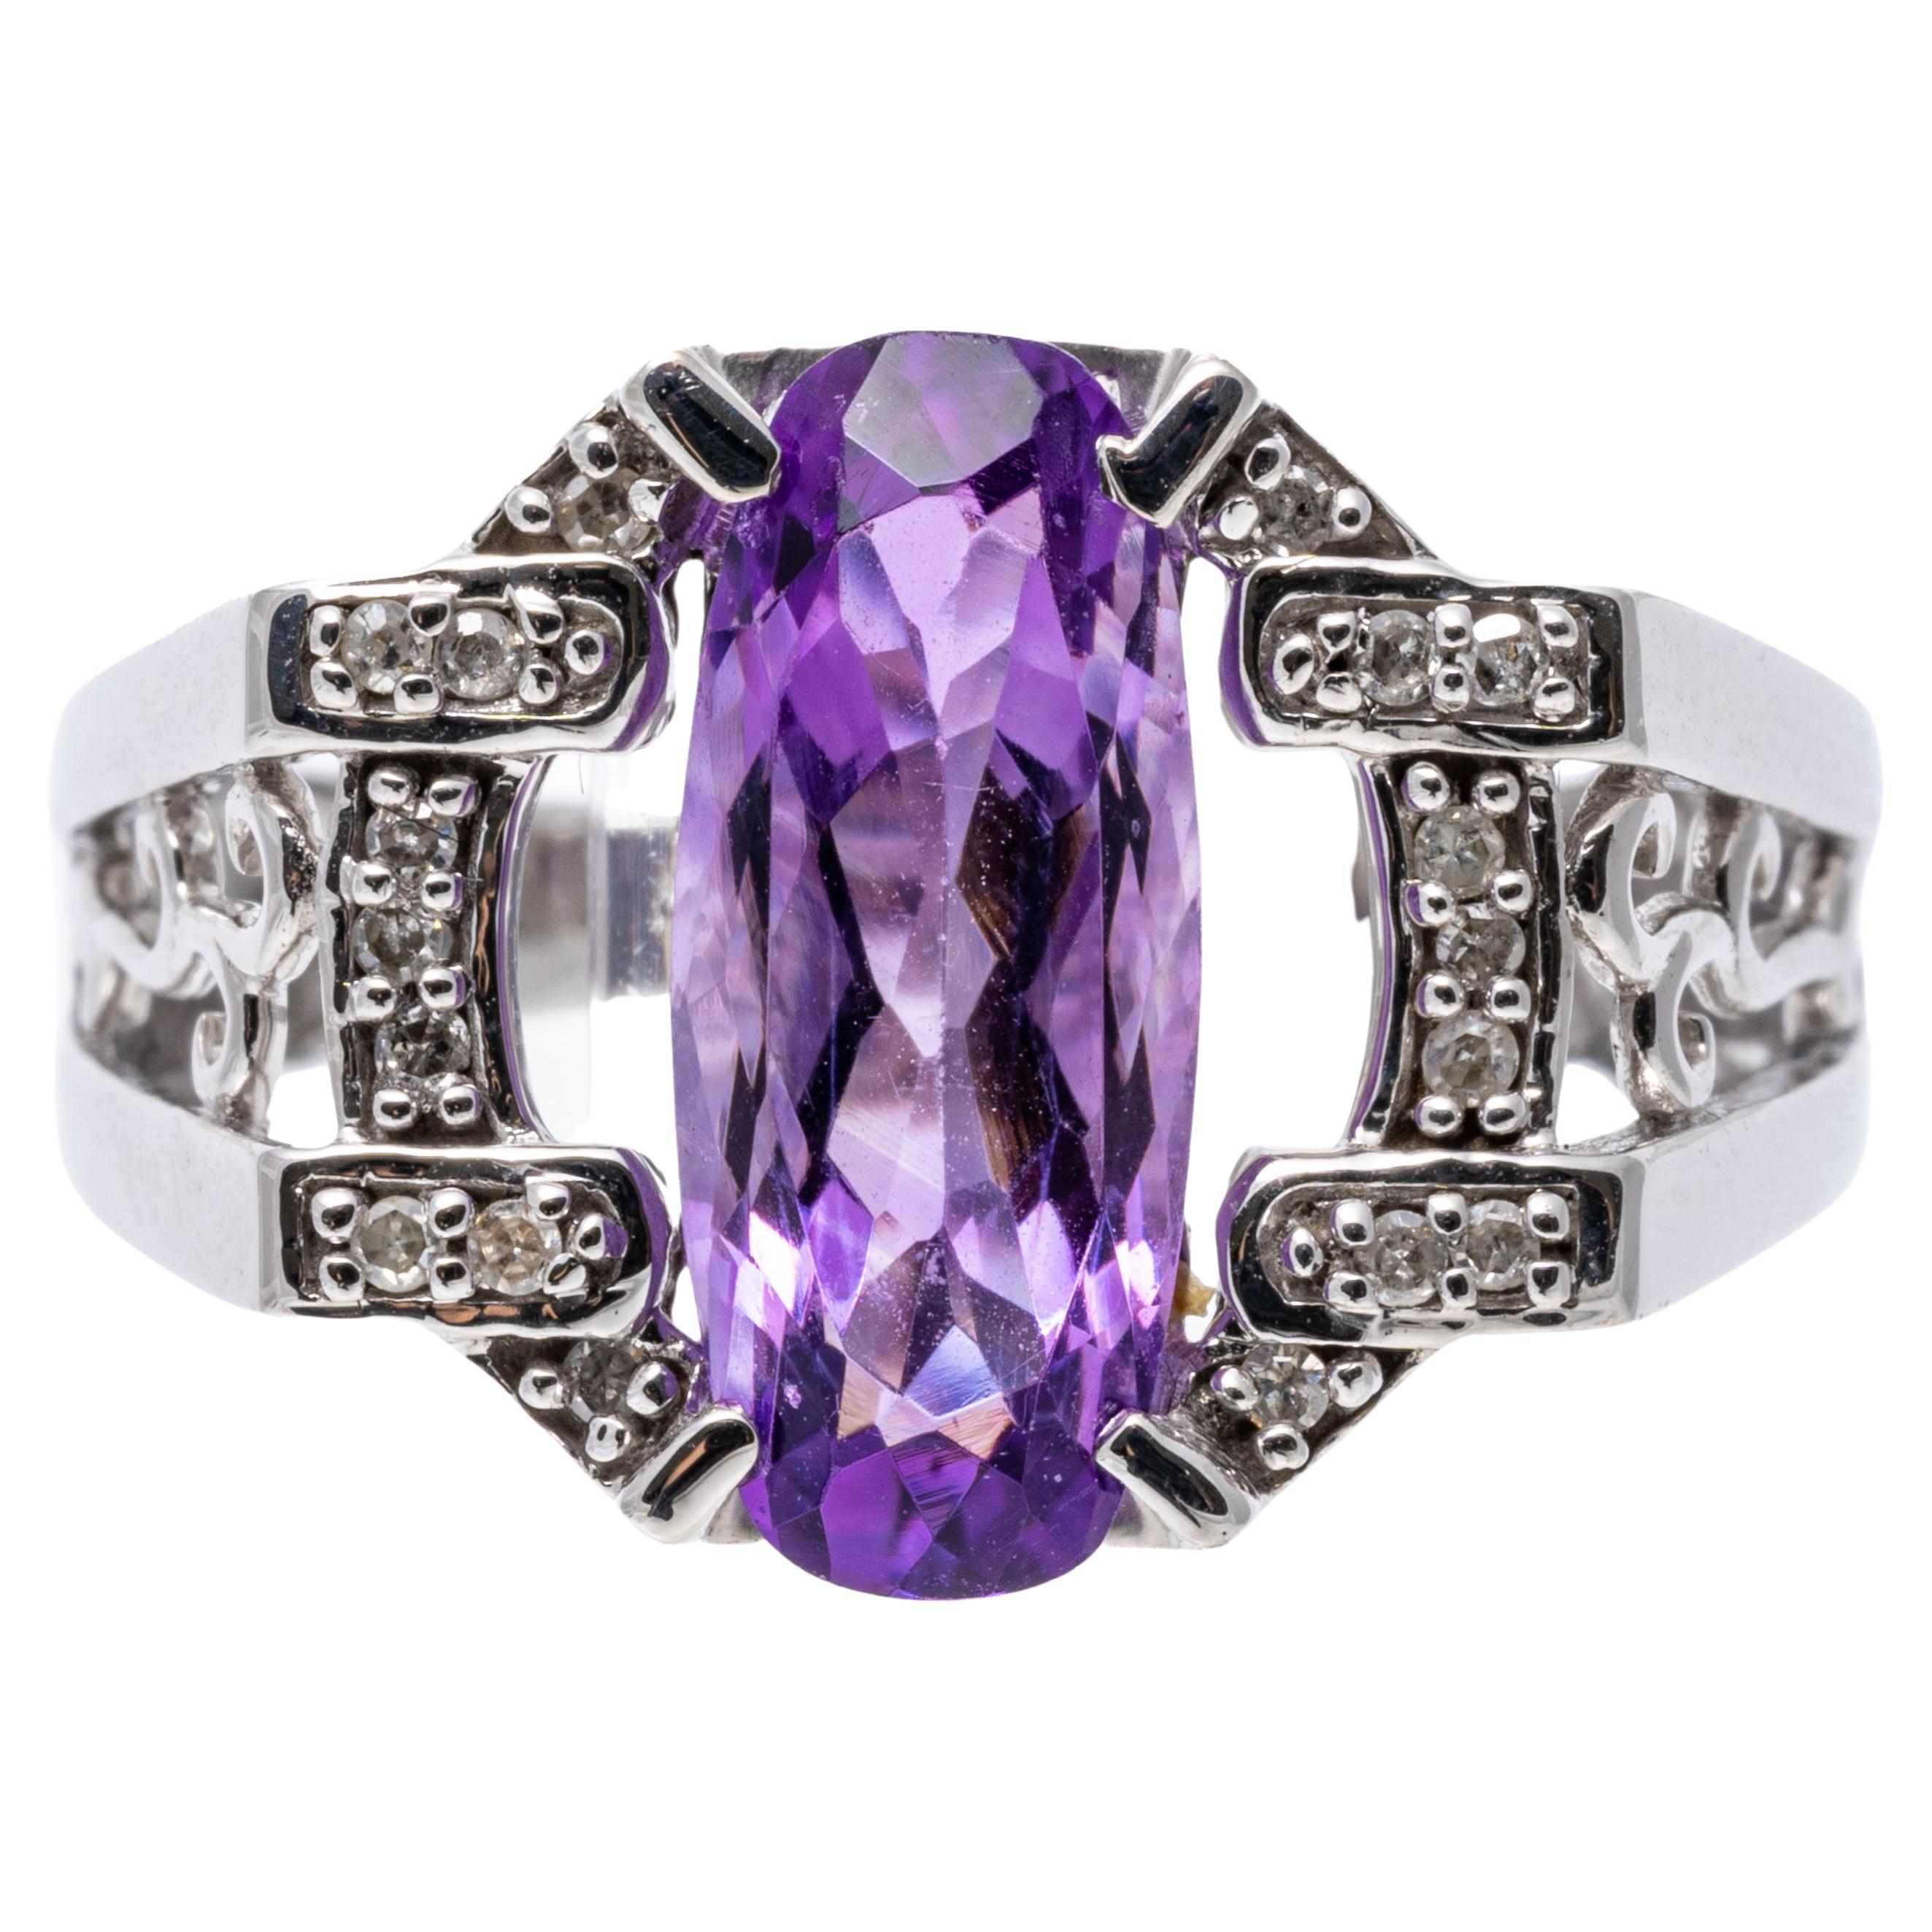 14k White Gold Elongated Oval Amethyst and Diamond Architectural Style Ring